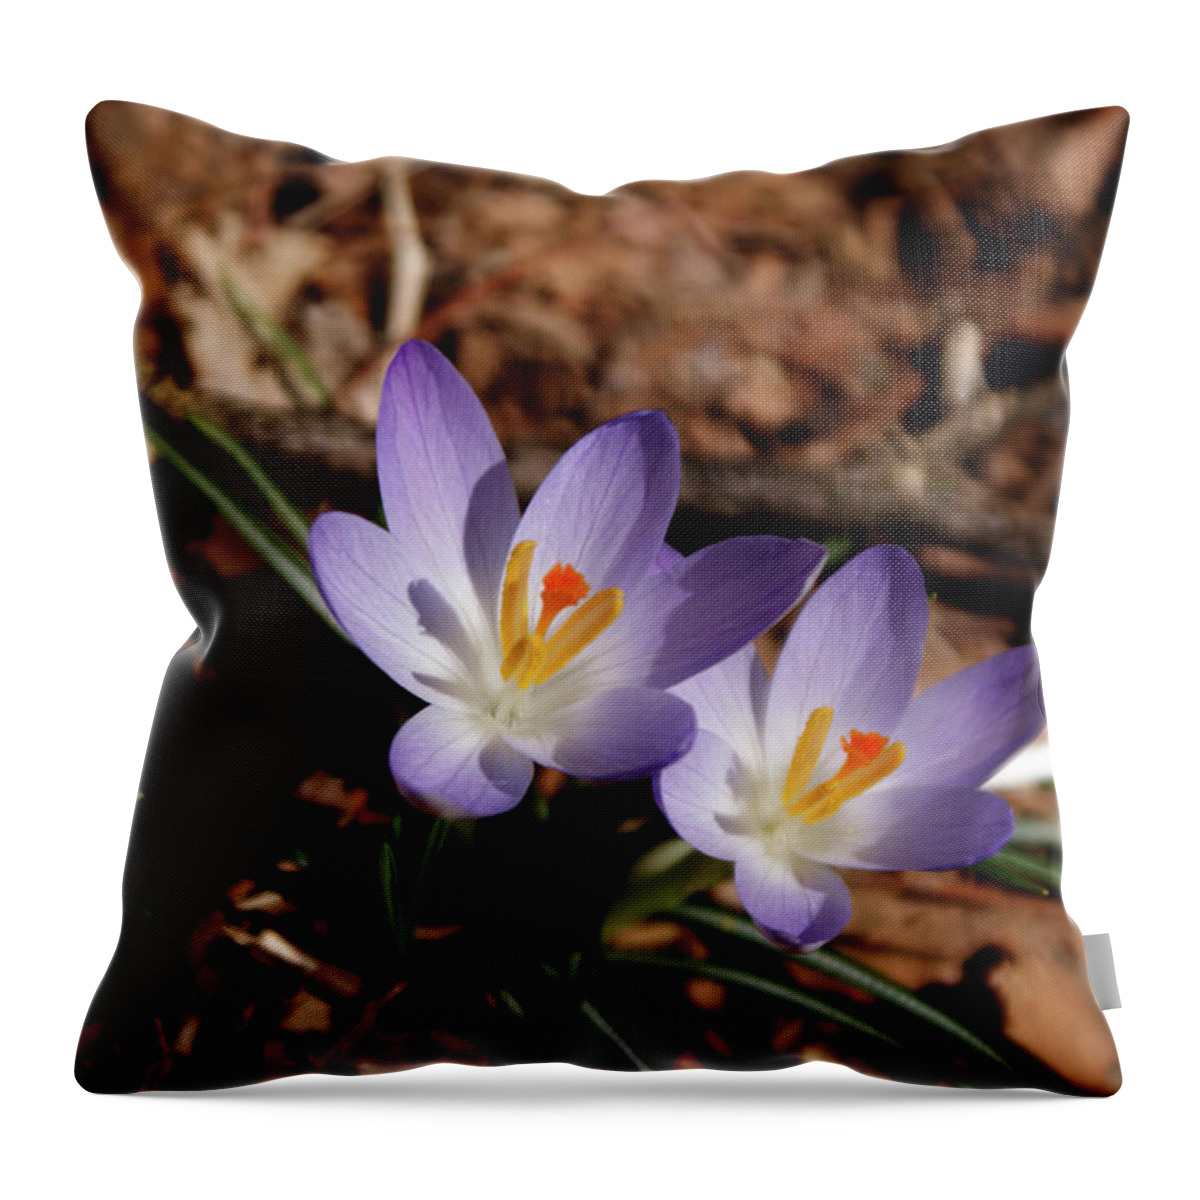 Wildflowers Throw Pillow featuring the photograph Spring Crocus by Paul Mashburn